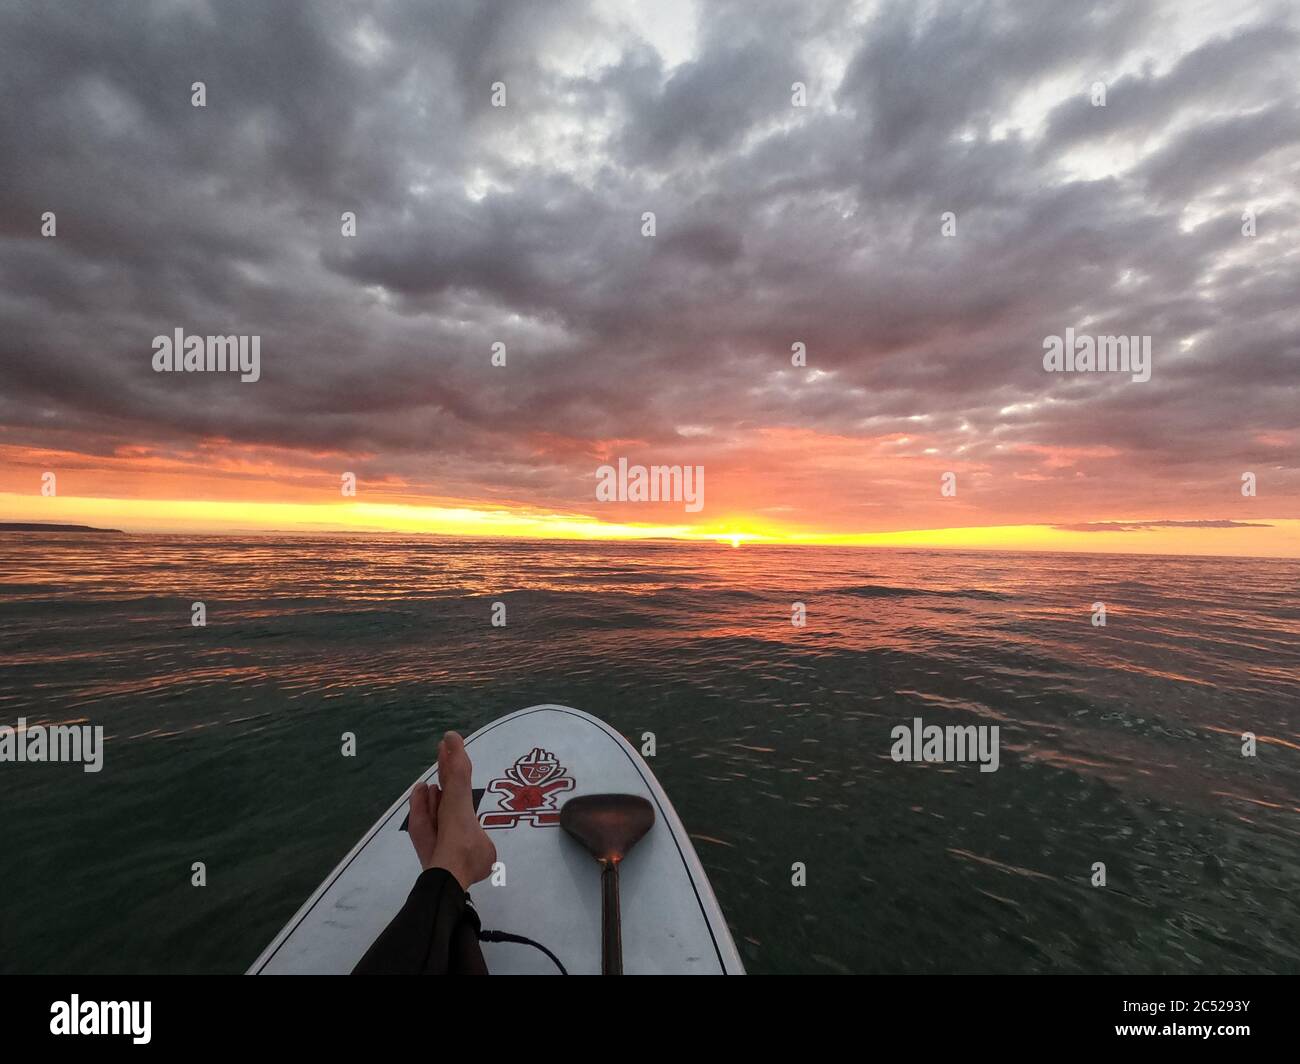 Escaping the virus. Watching an Incredible sunset on a Stand Up paddle board during coronavirus lockdown Stock Photo